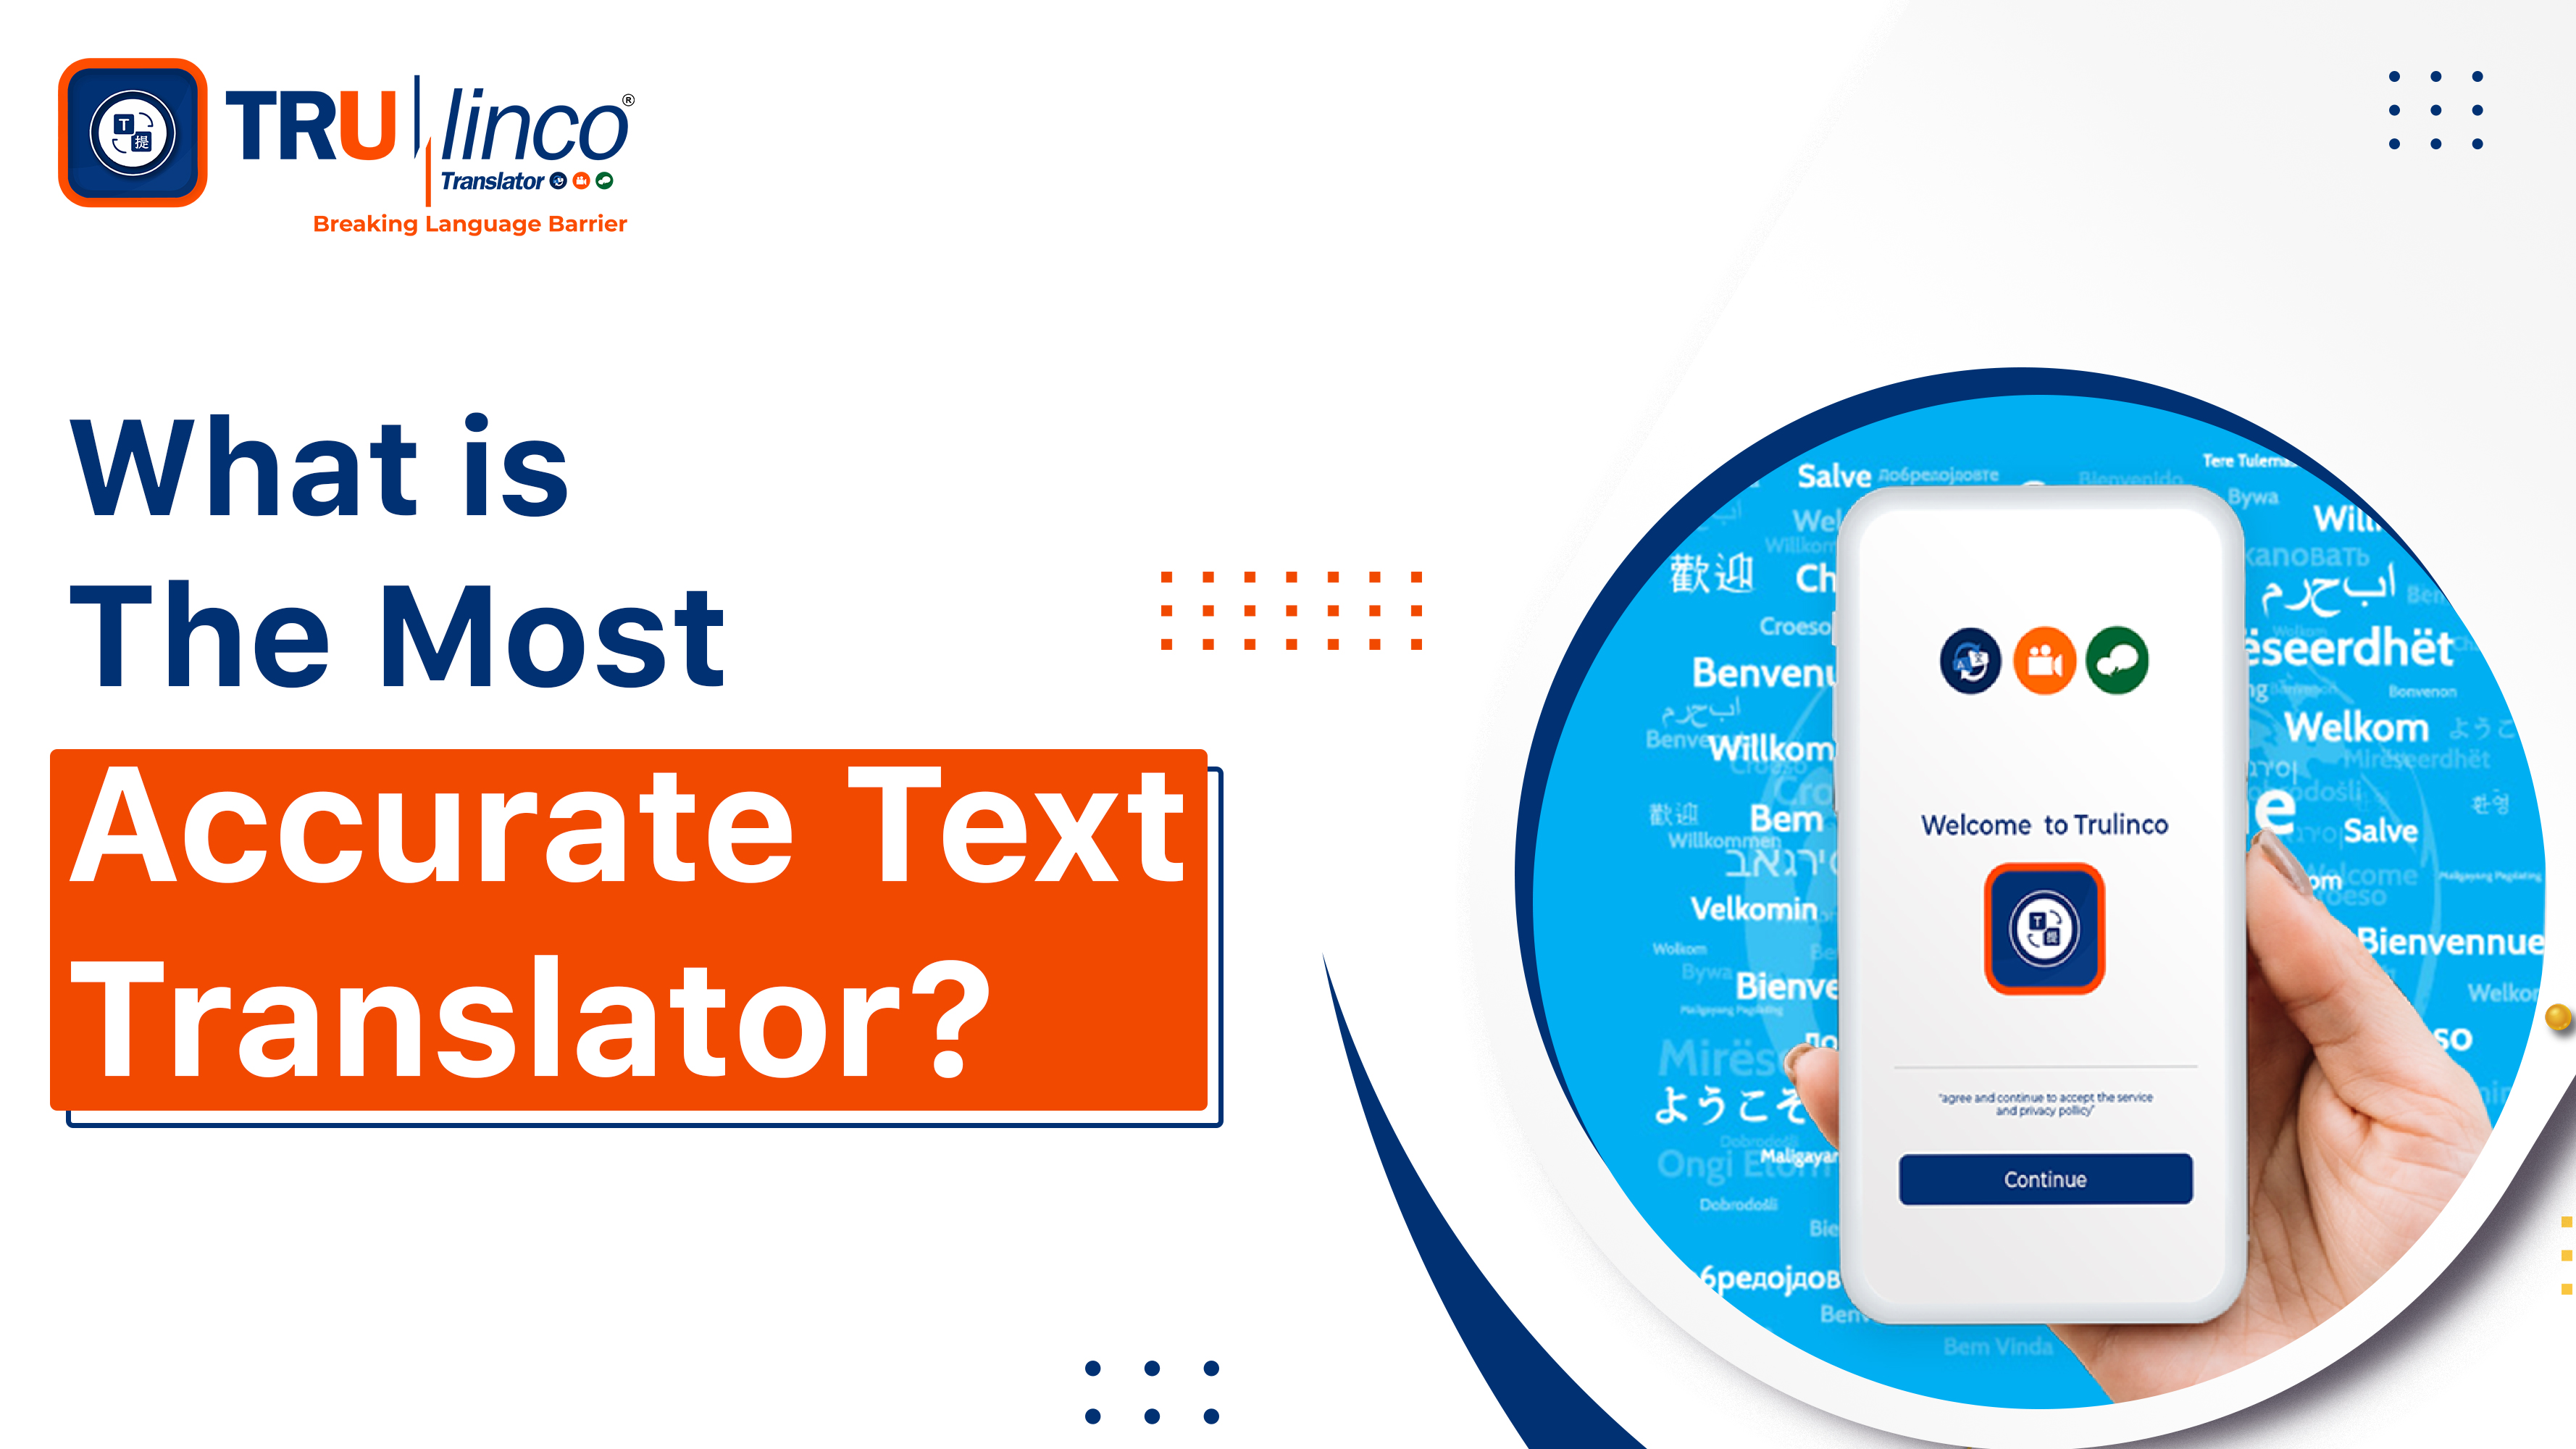 what is the most accurate text Translator